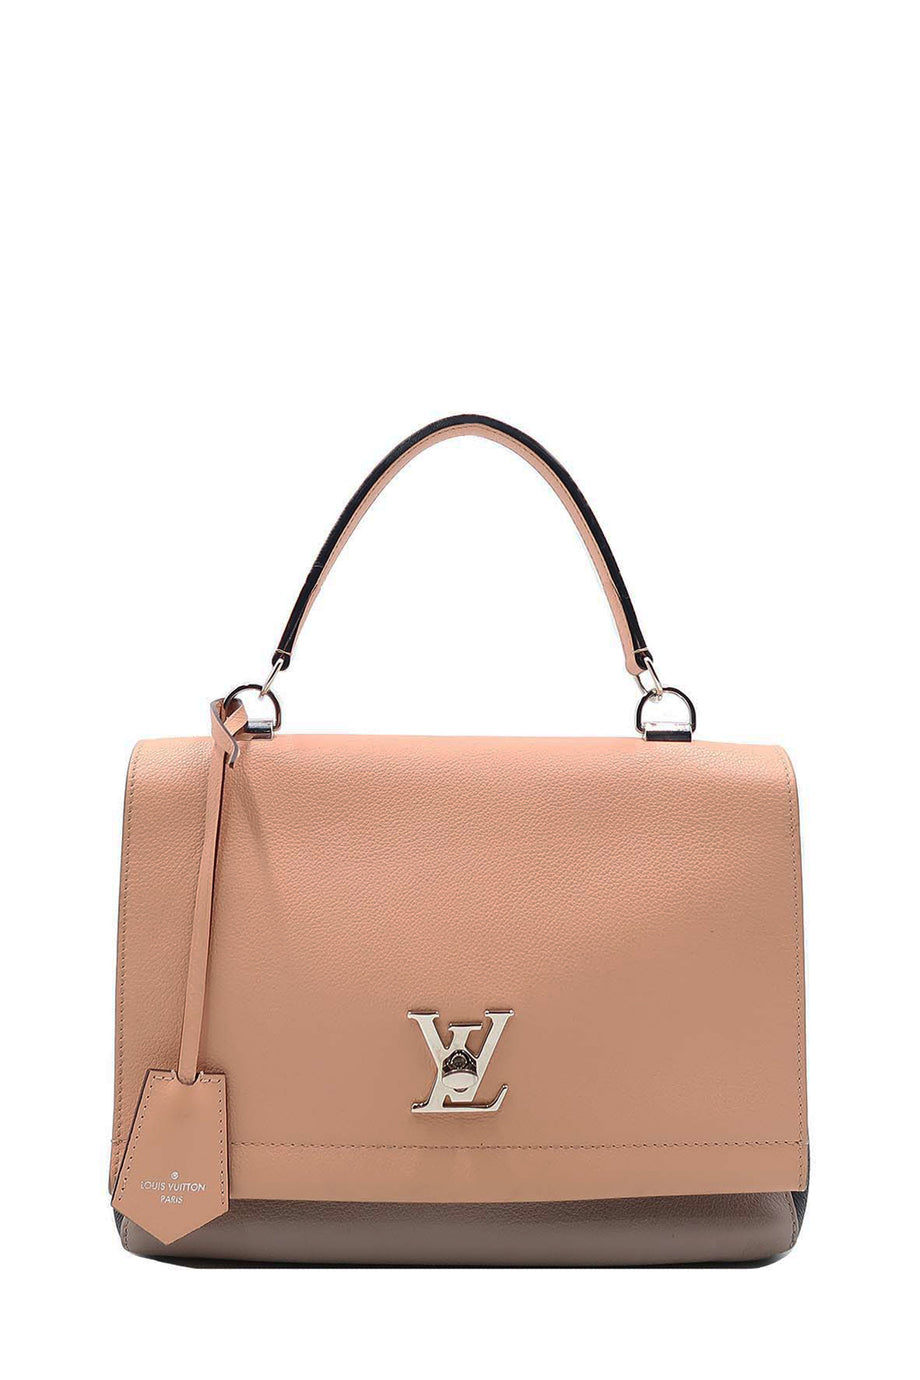 Buy Authentic Louis Vuitton Bags for Sale from Second Edit by Style Theory